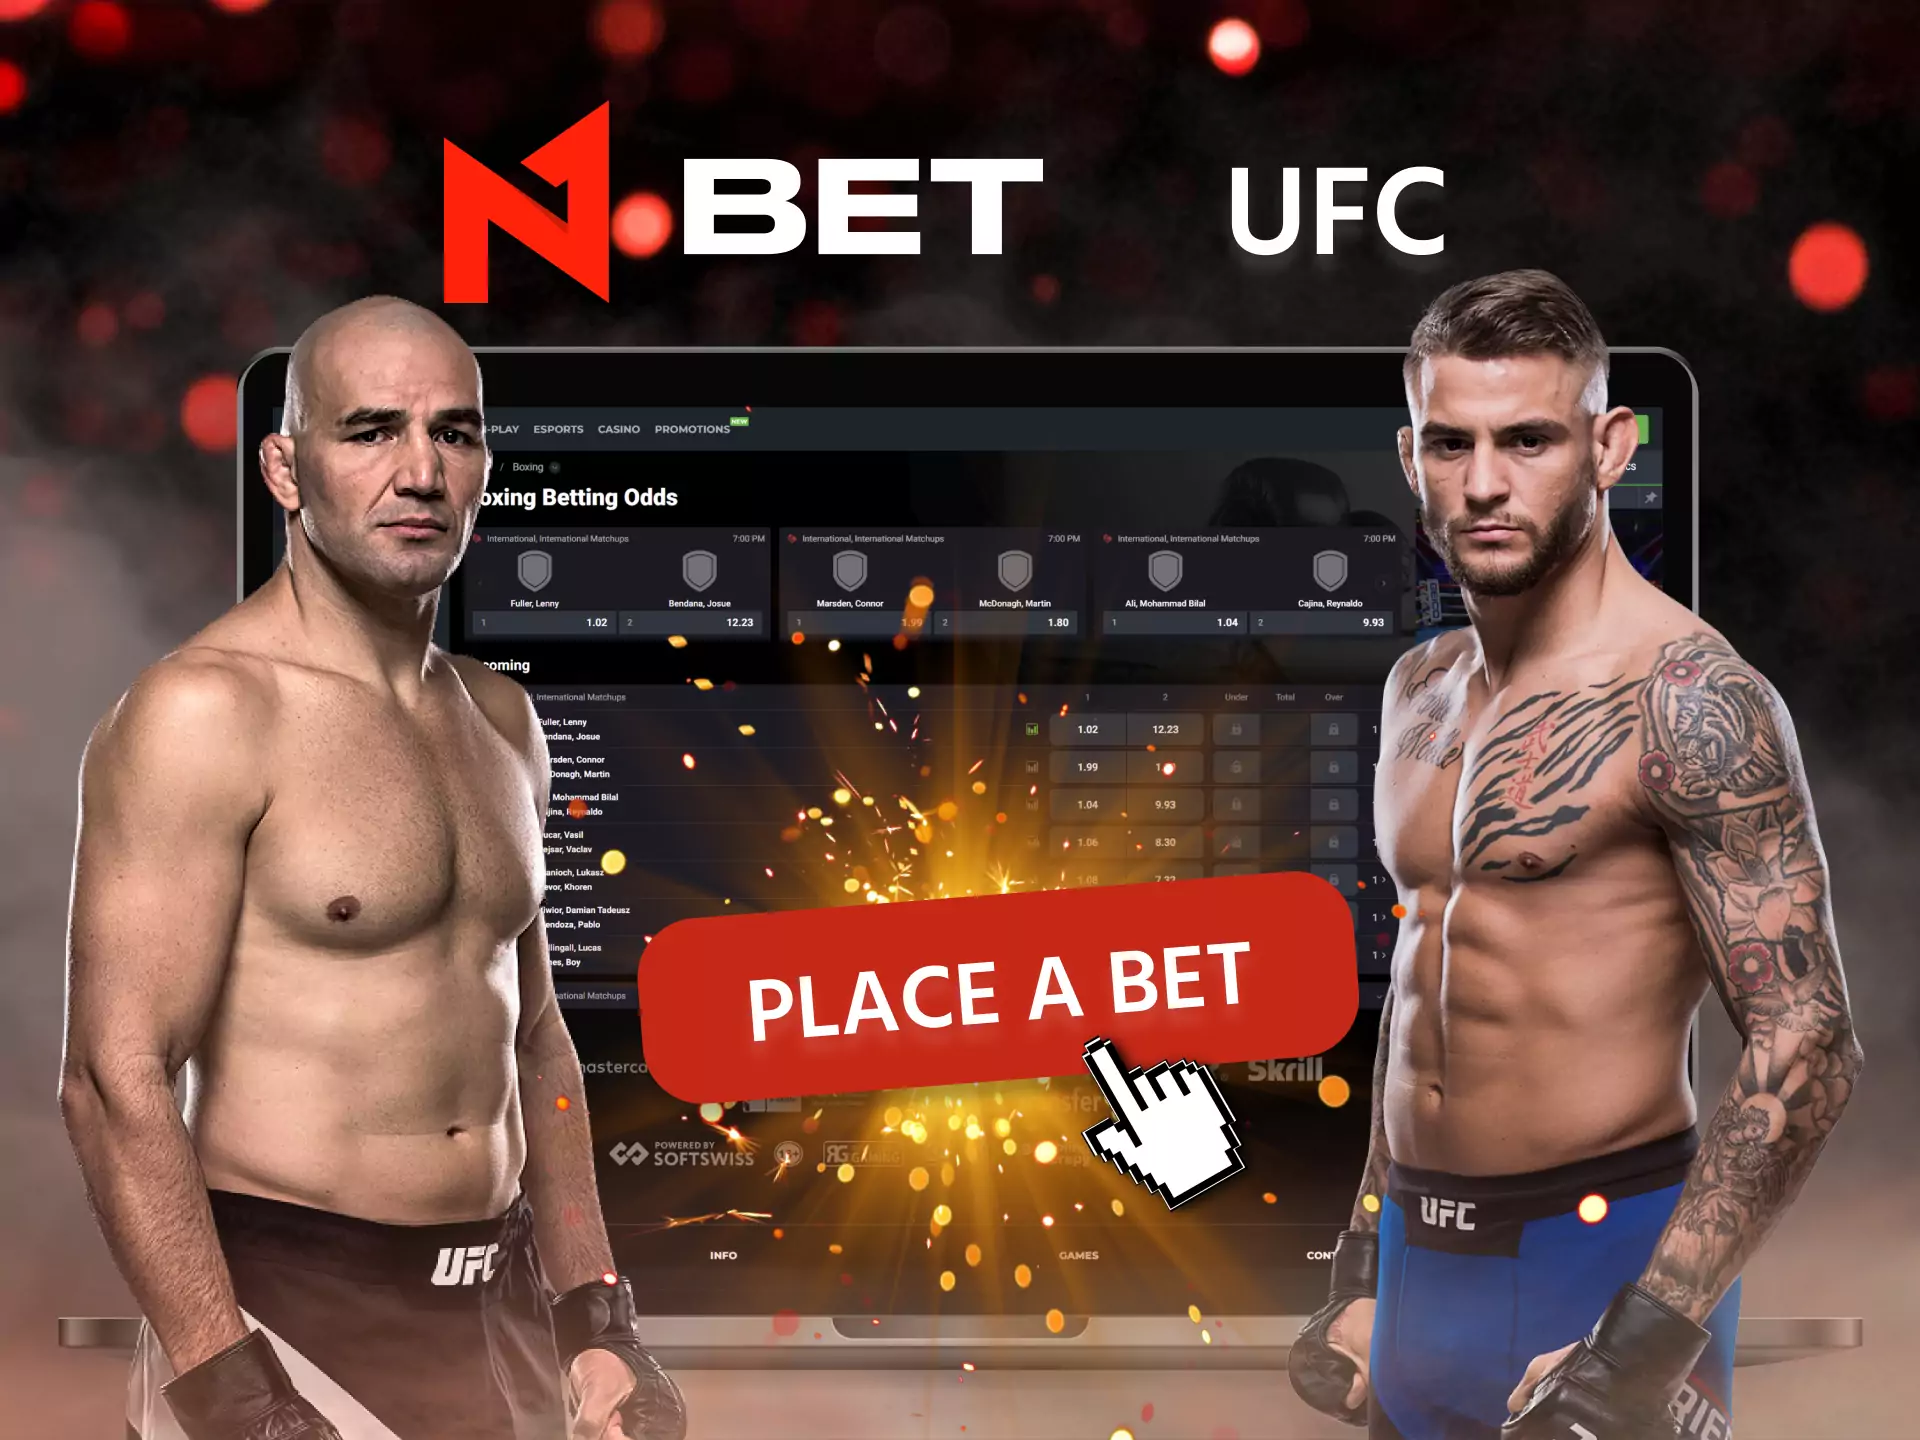 Place bets on UFC games in N1Bet.